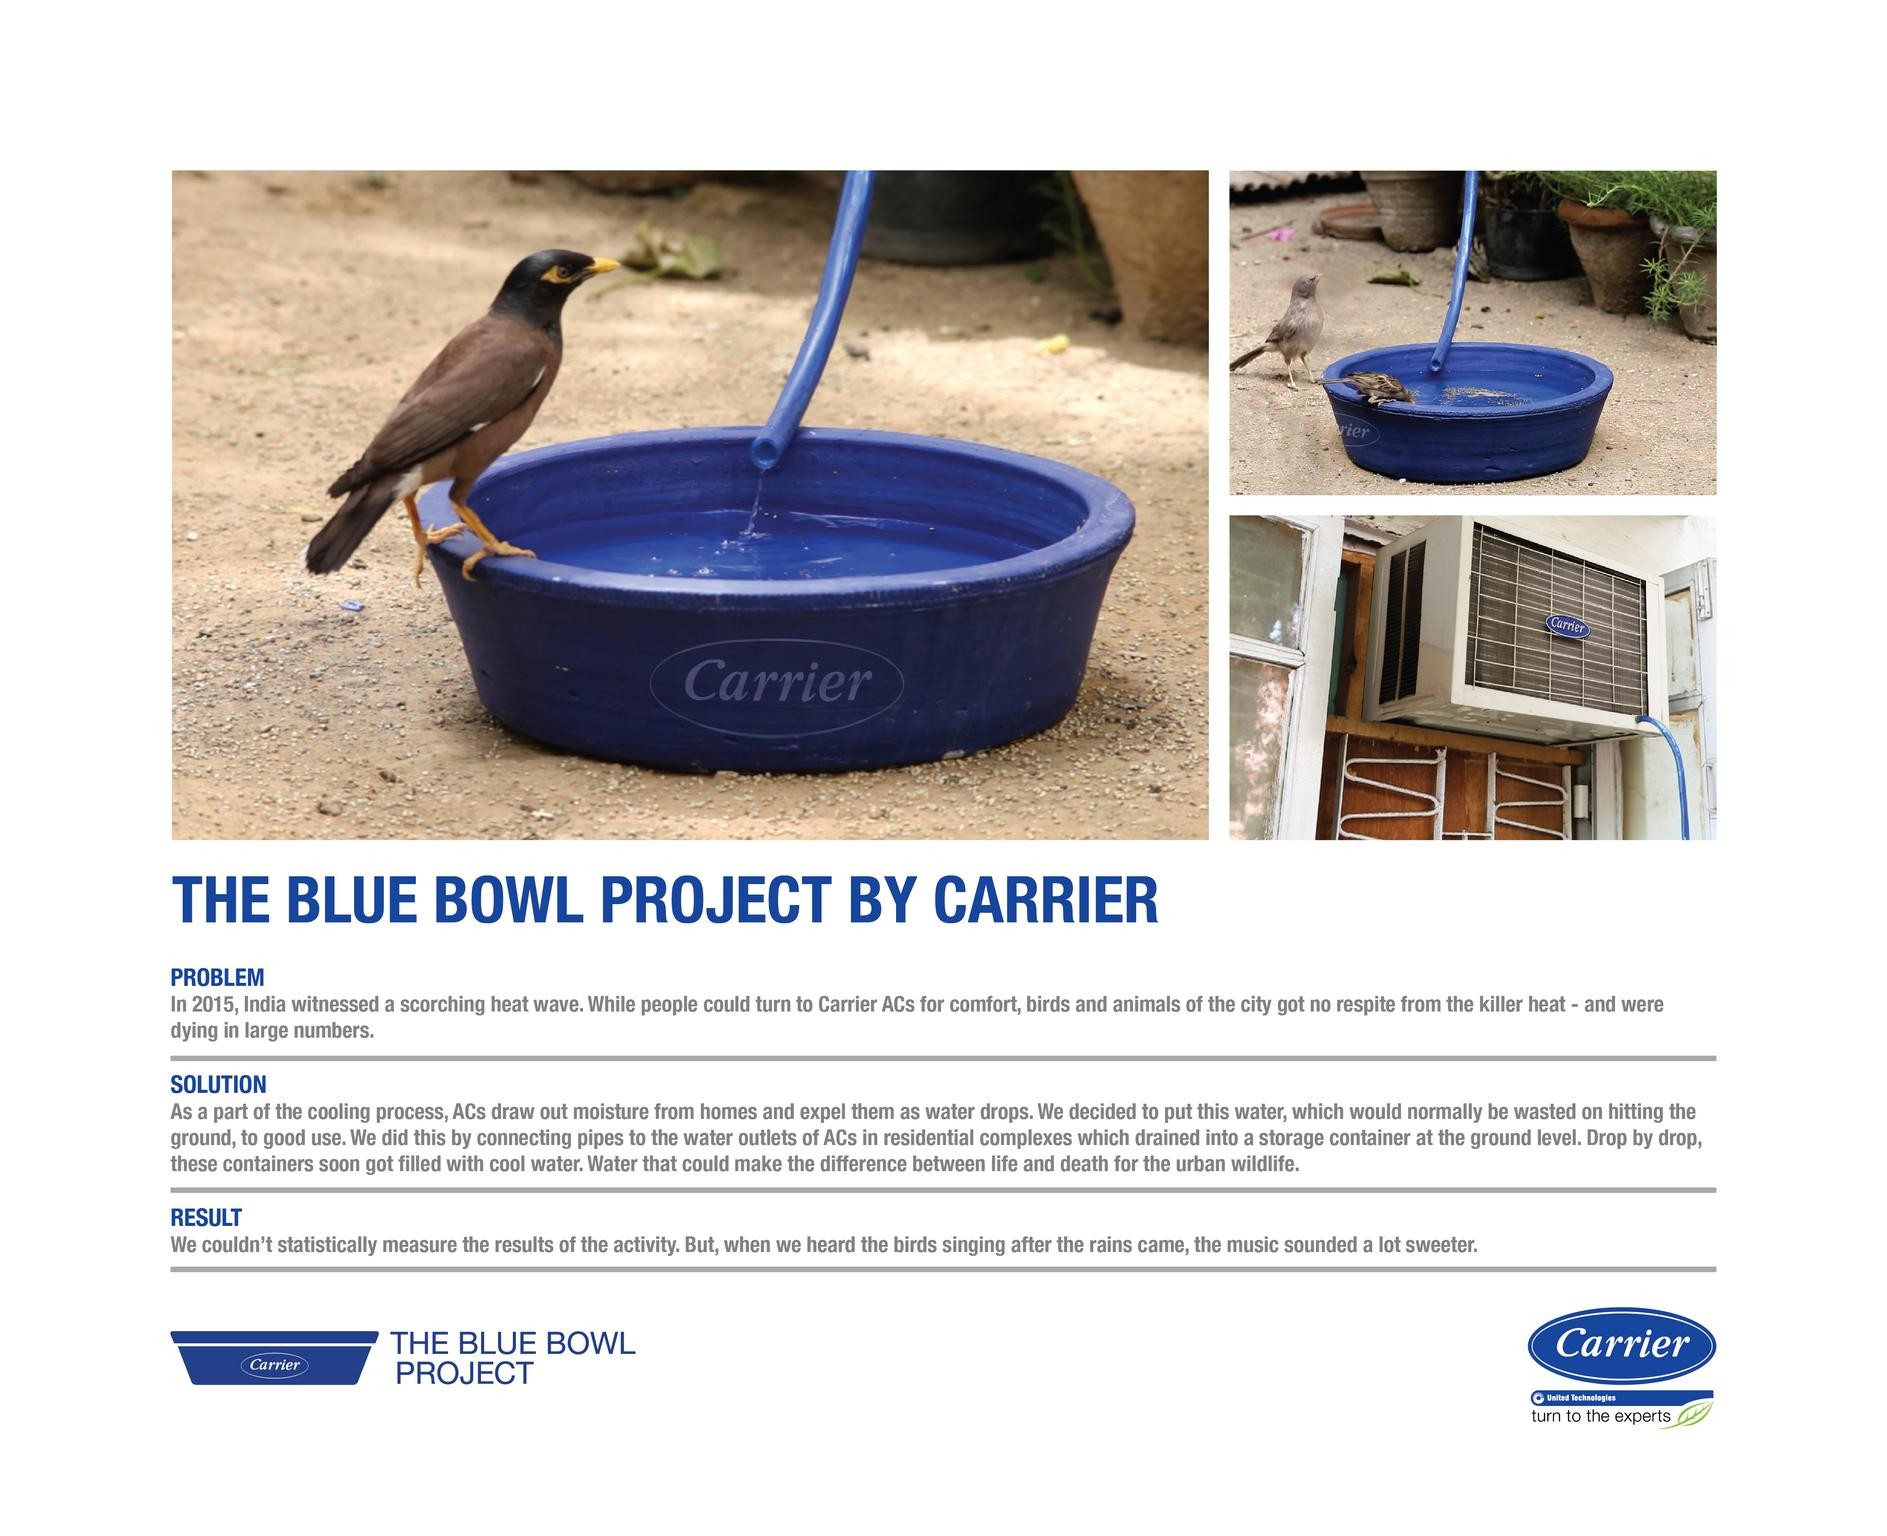 The Blue Bowl Project